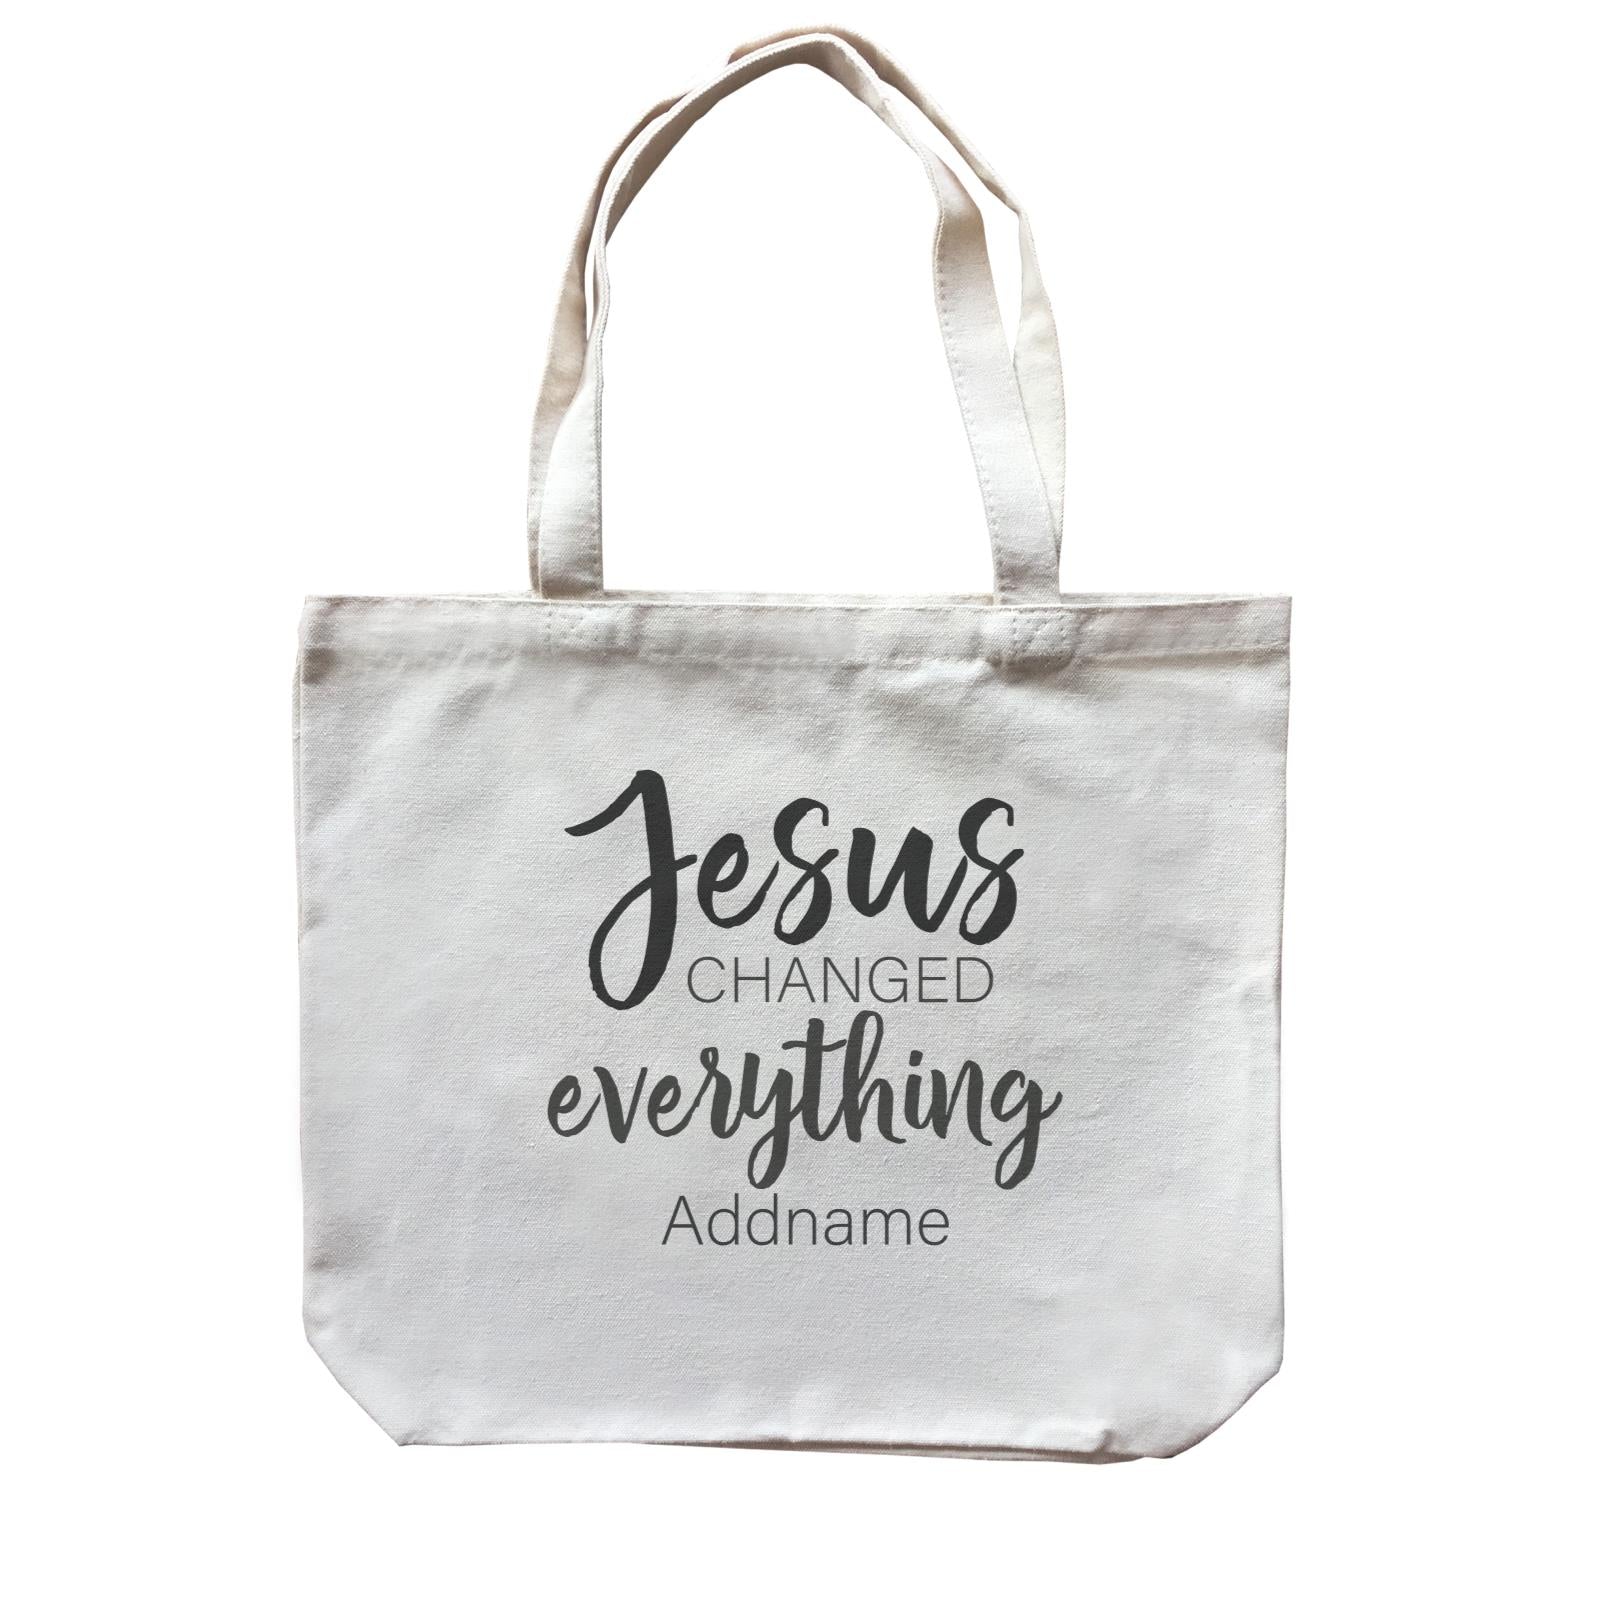 Christian Series Jesus Changed Everthing Addname Canvas Bag